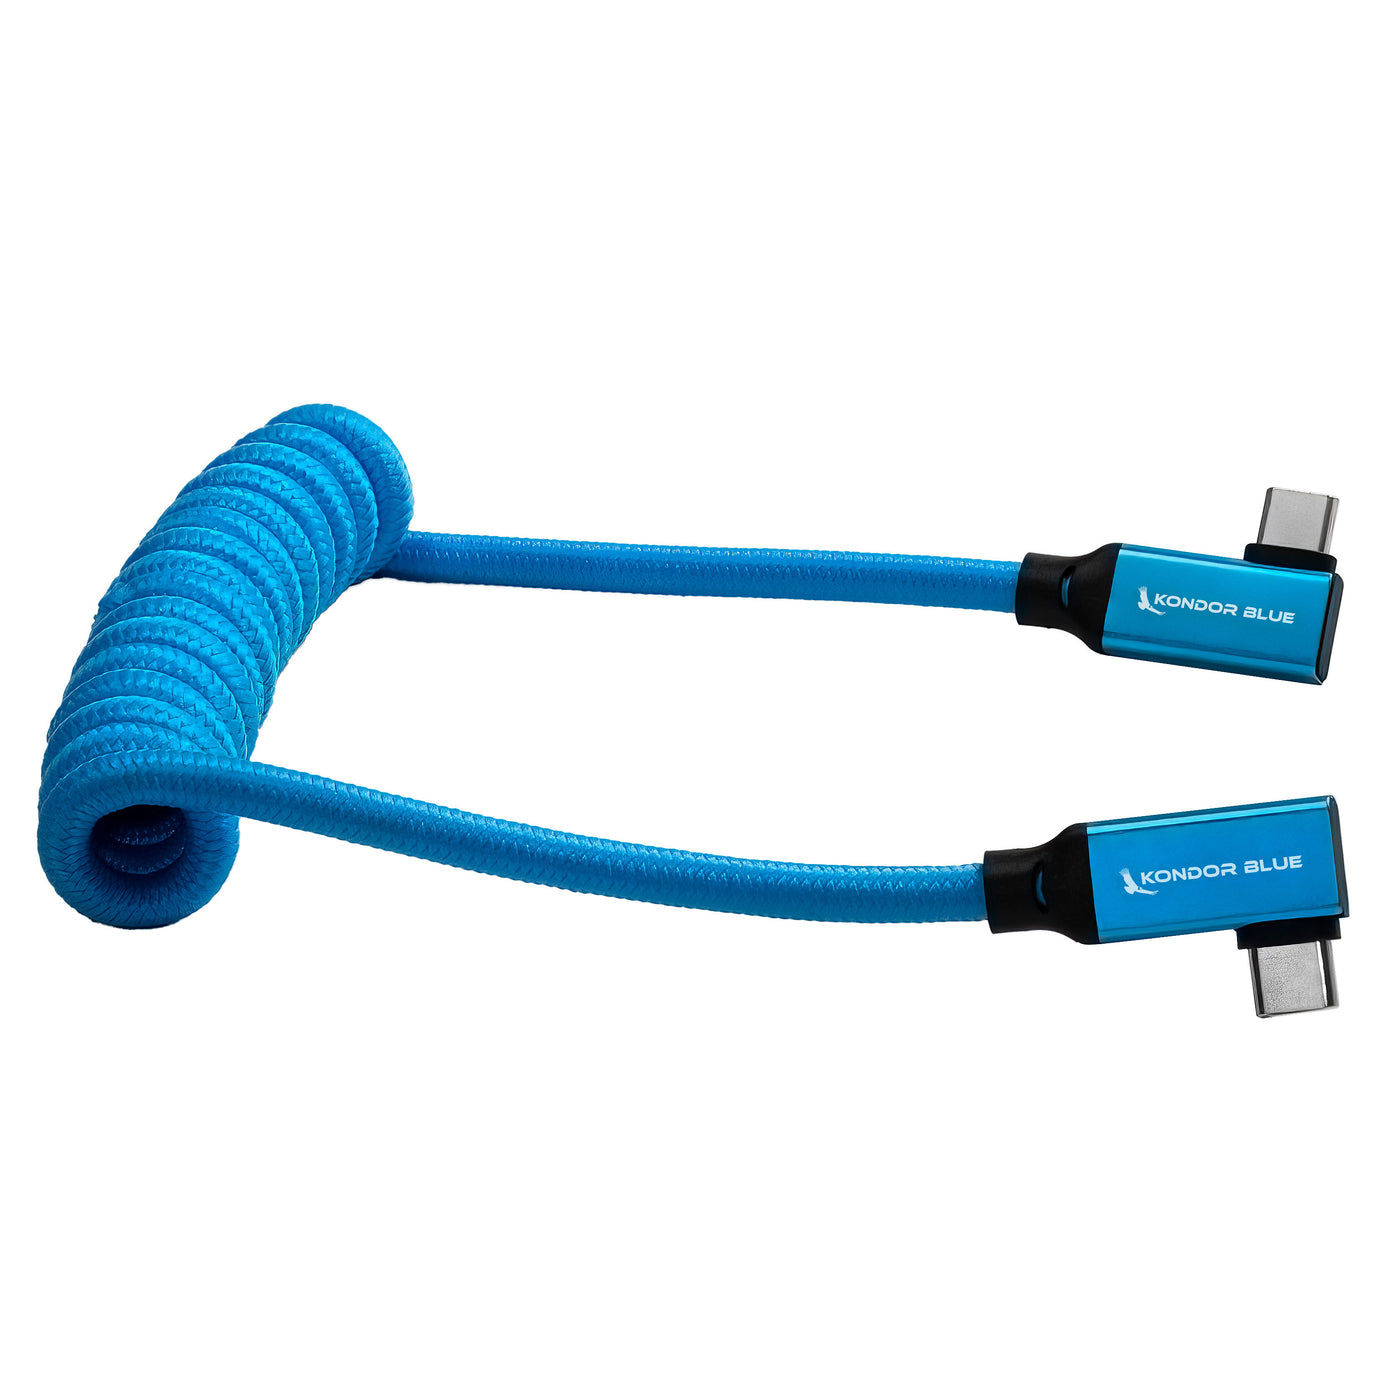 12-24" Coiled USB-C 3.1 Right Angle Braided Cable for 8K Data and Power Delivery